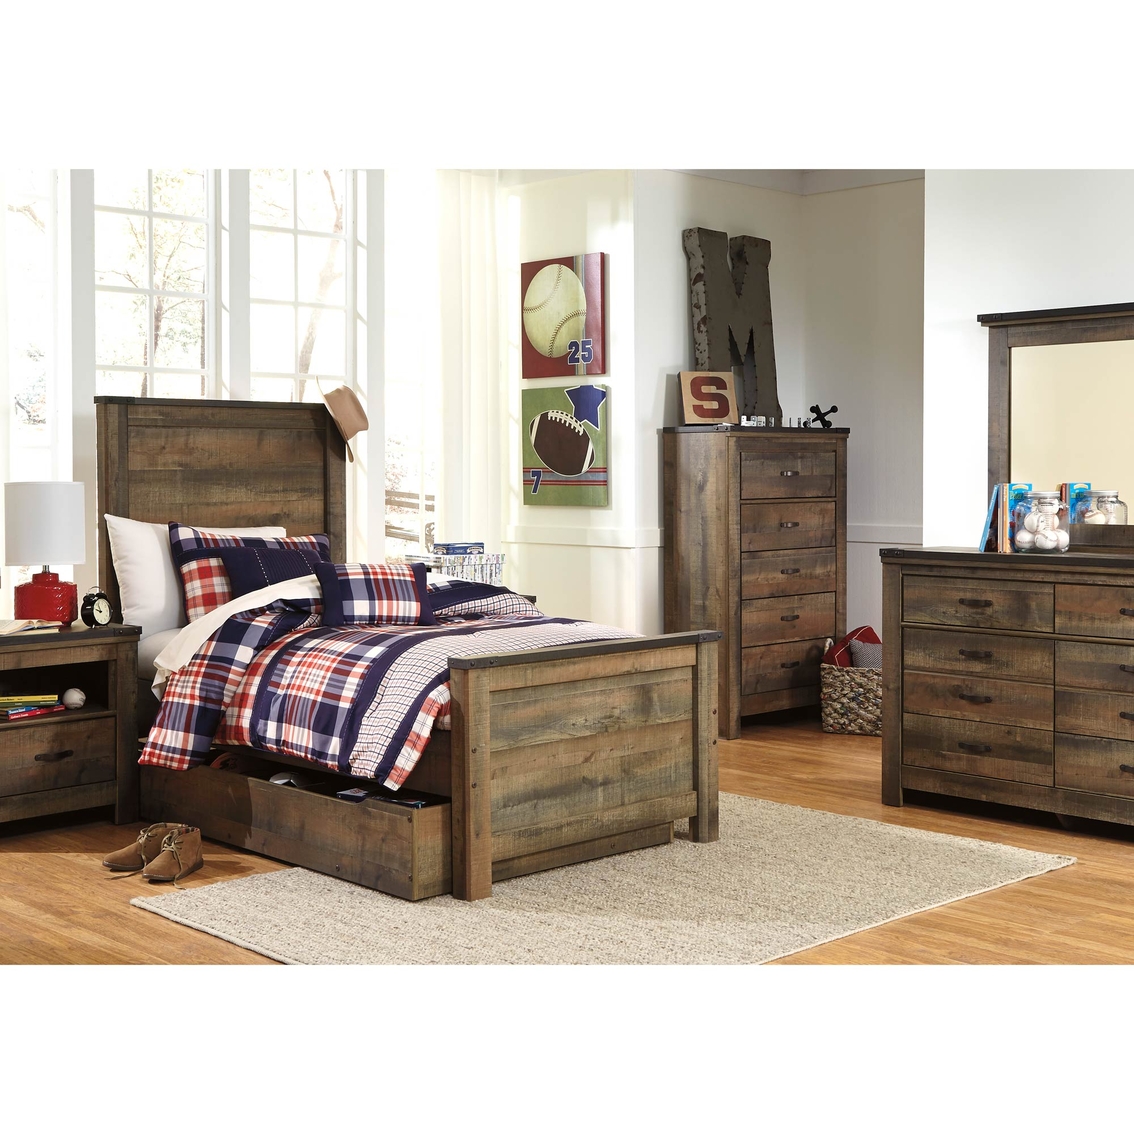 Ashley Trinell Twin Trundle Bed - Image 2 of 4